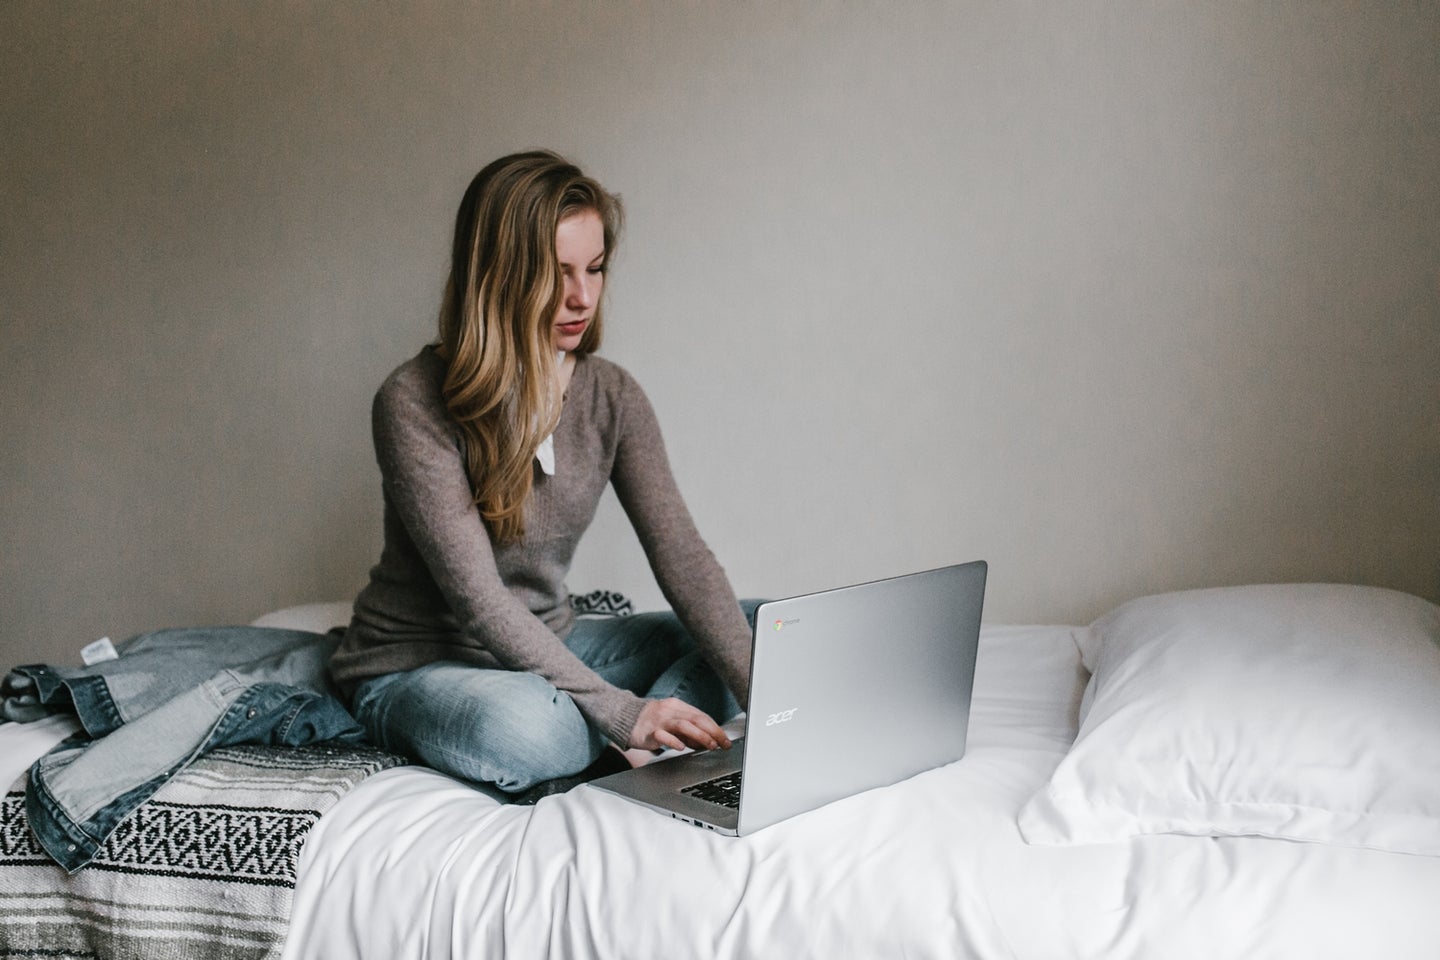 a woman sitting on a bed with white blankets, using a Chromebook